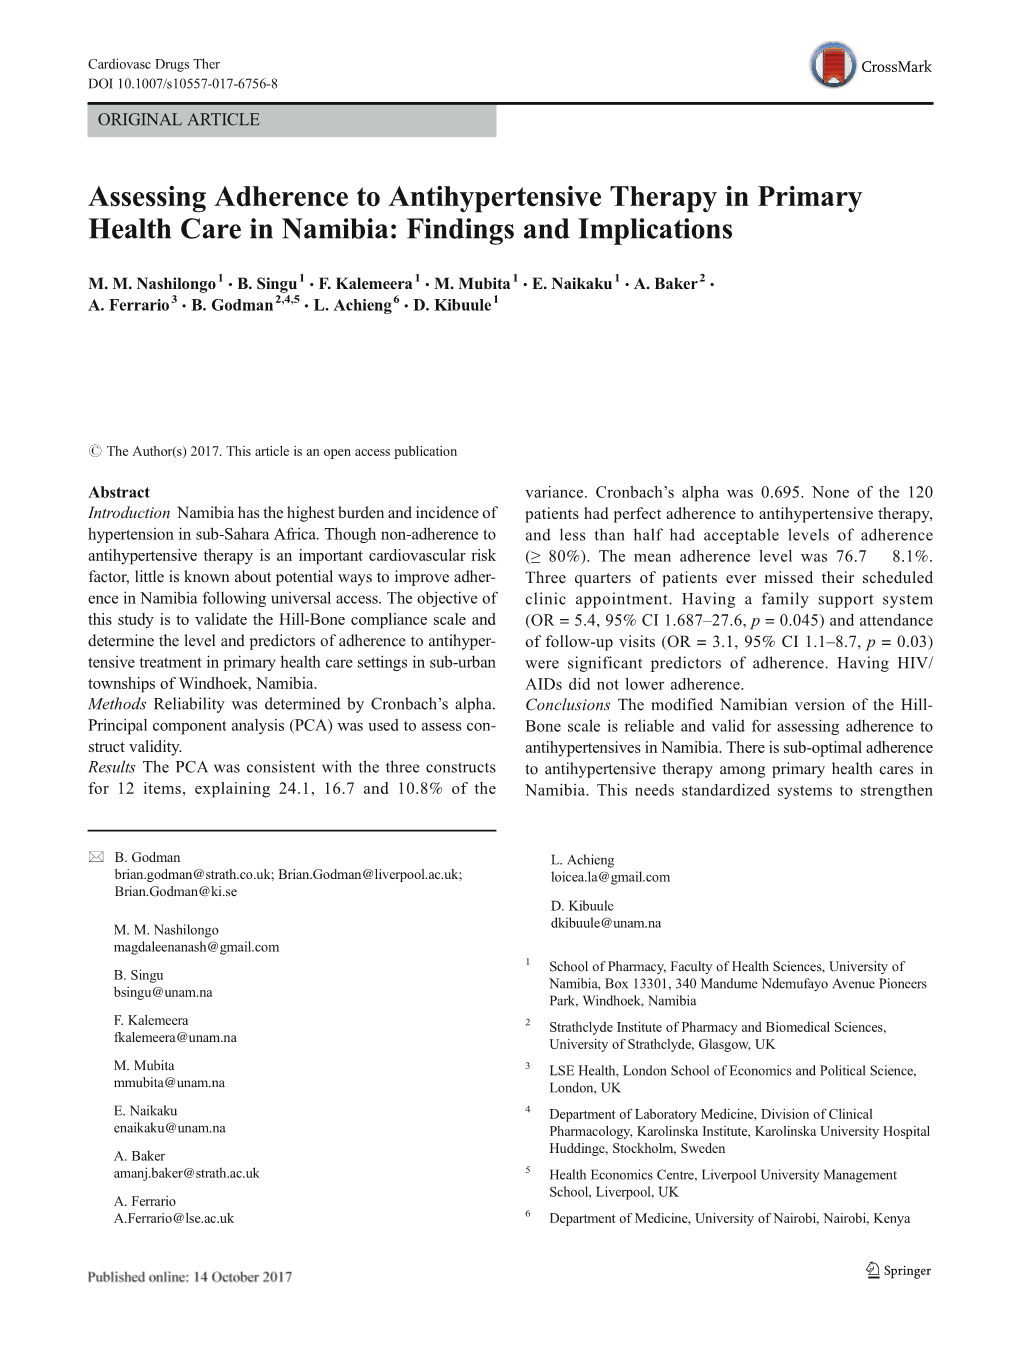 Assessing Adherence to Antihypertensive Therapy in Primary Health Care in Namibia: Findings and Implications